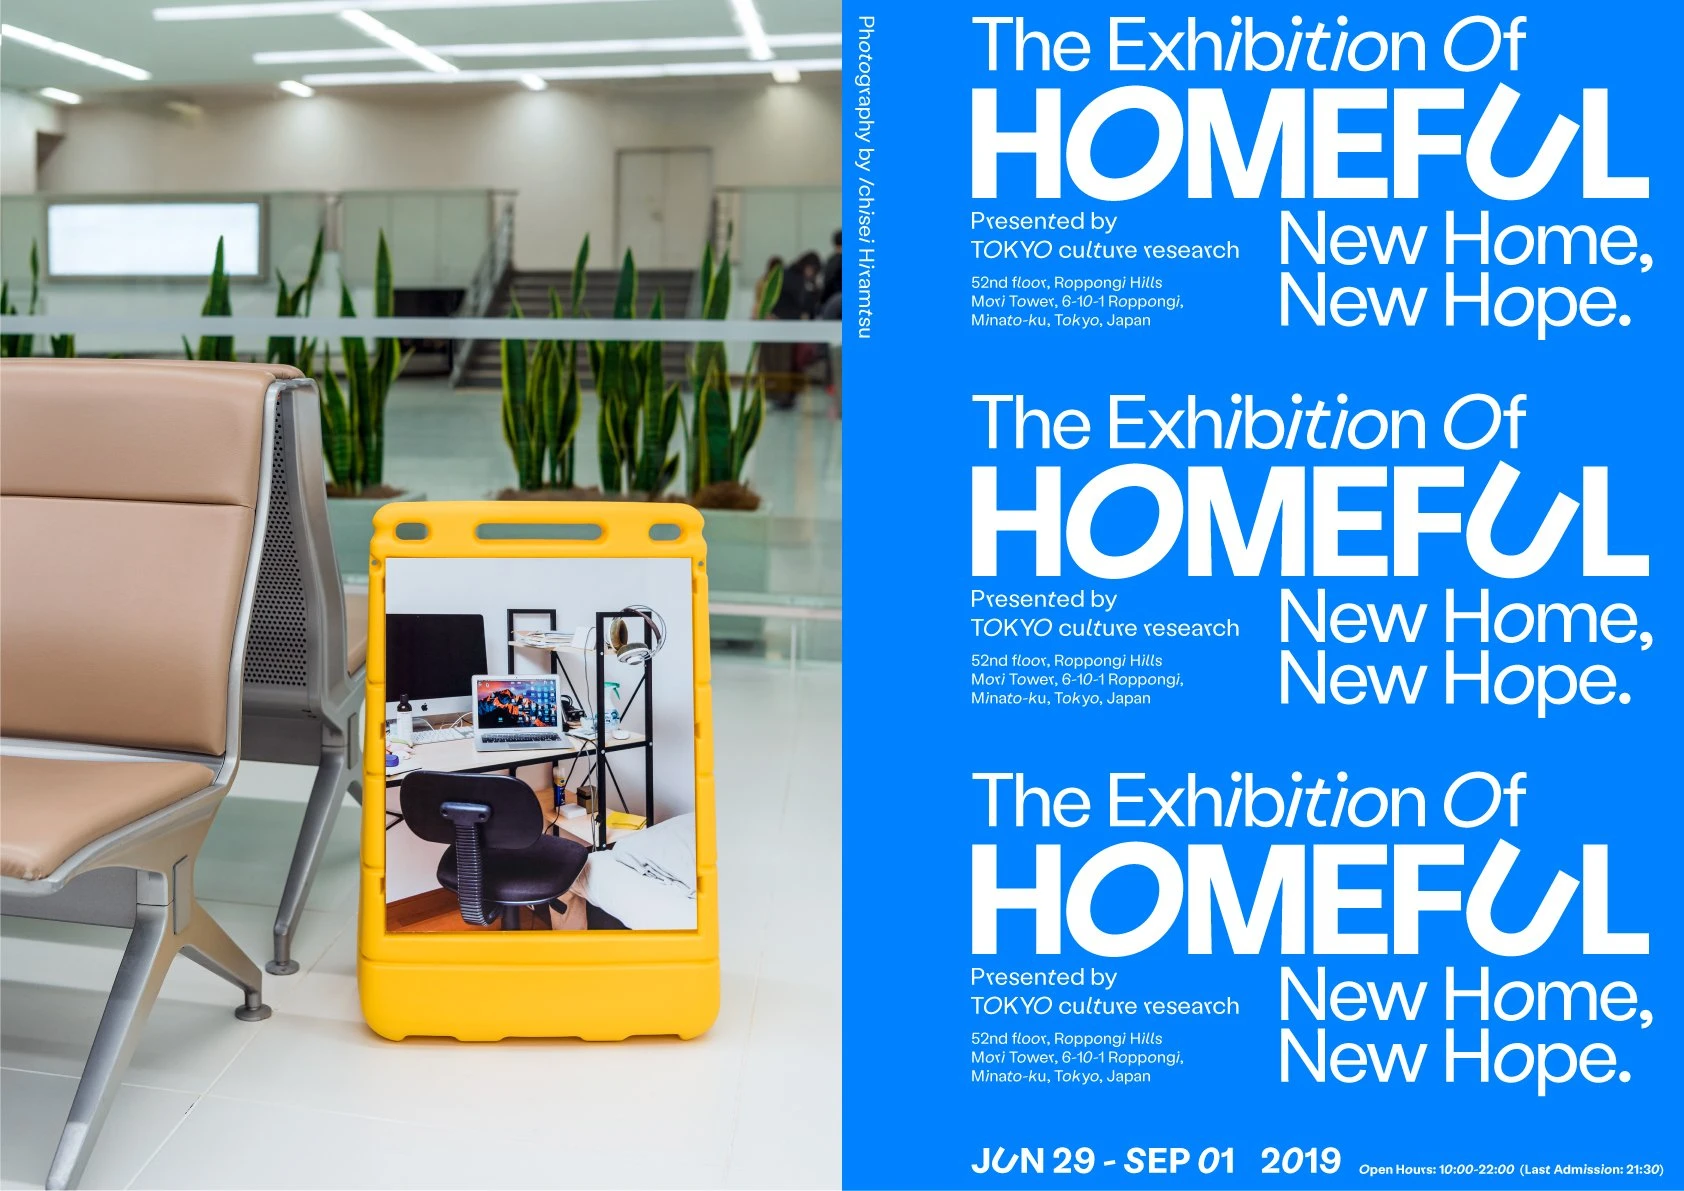 (c)『THE EXHIBITION OF HOMEFUL −NEW HOME, NEW HOPE』メインビジュアル